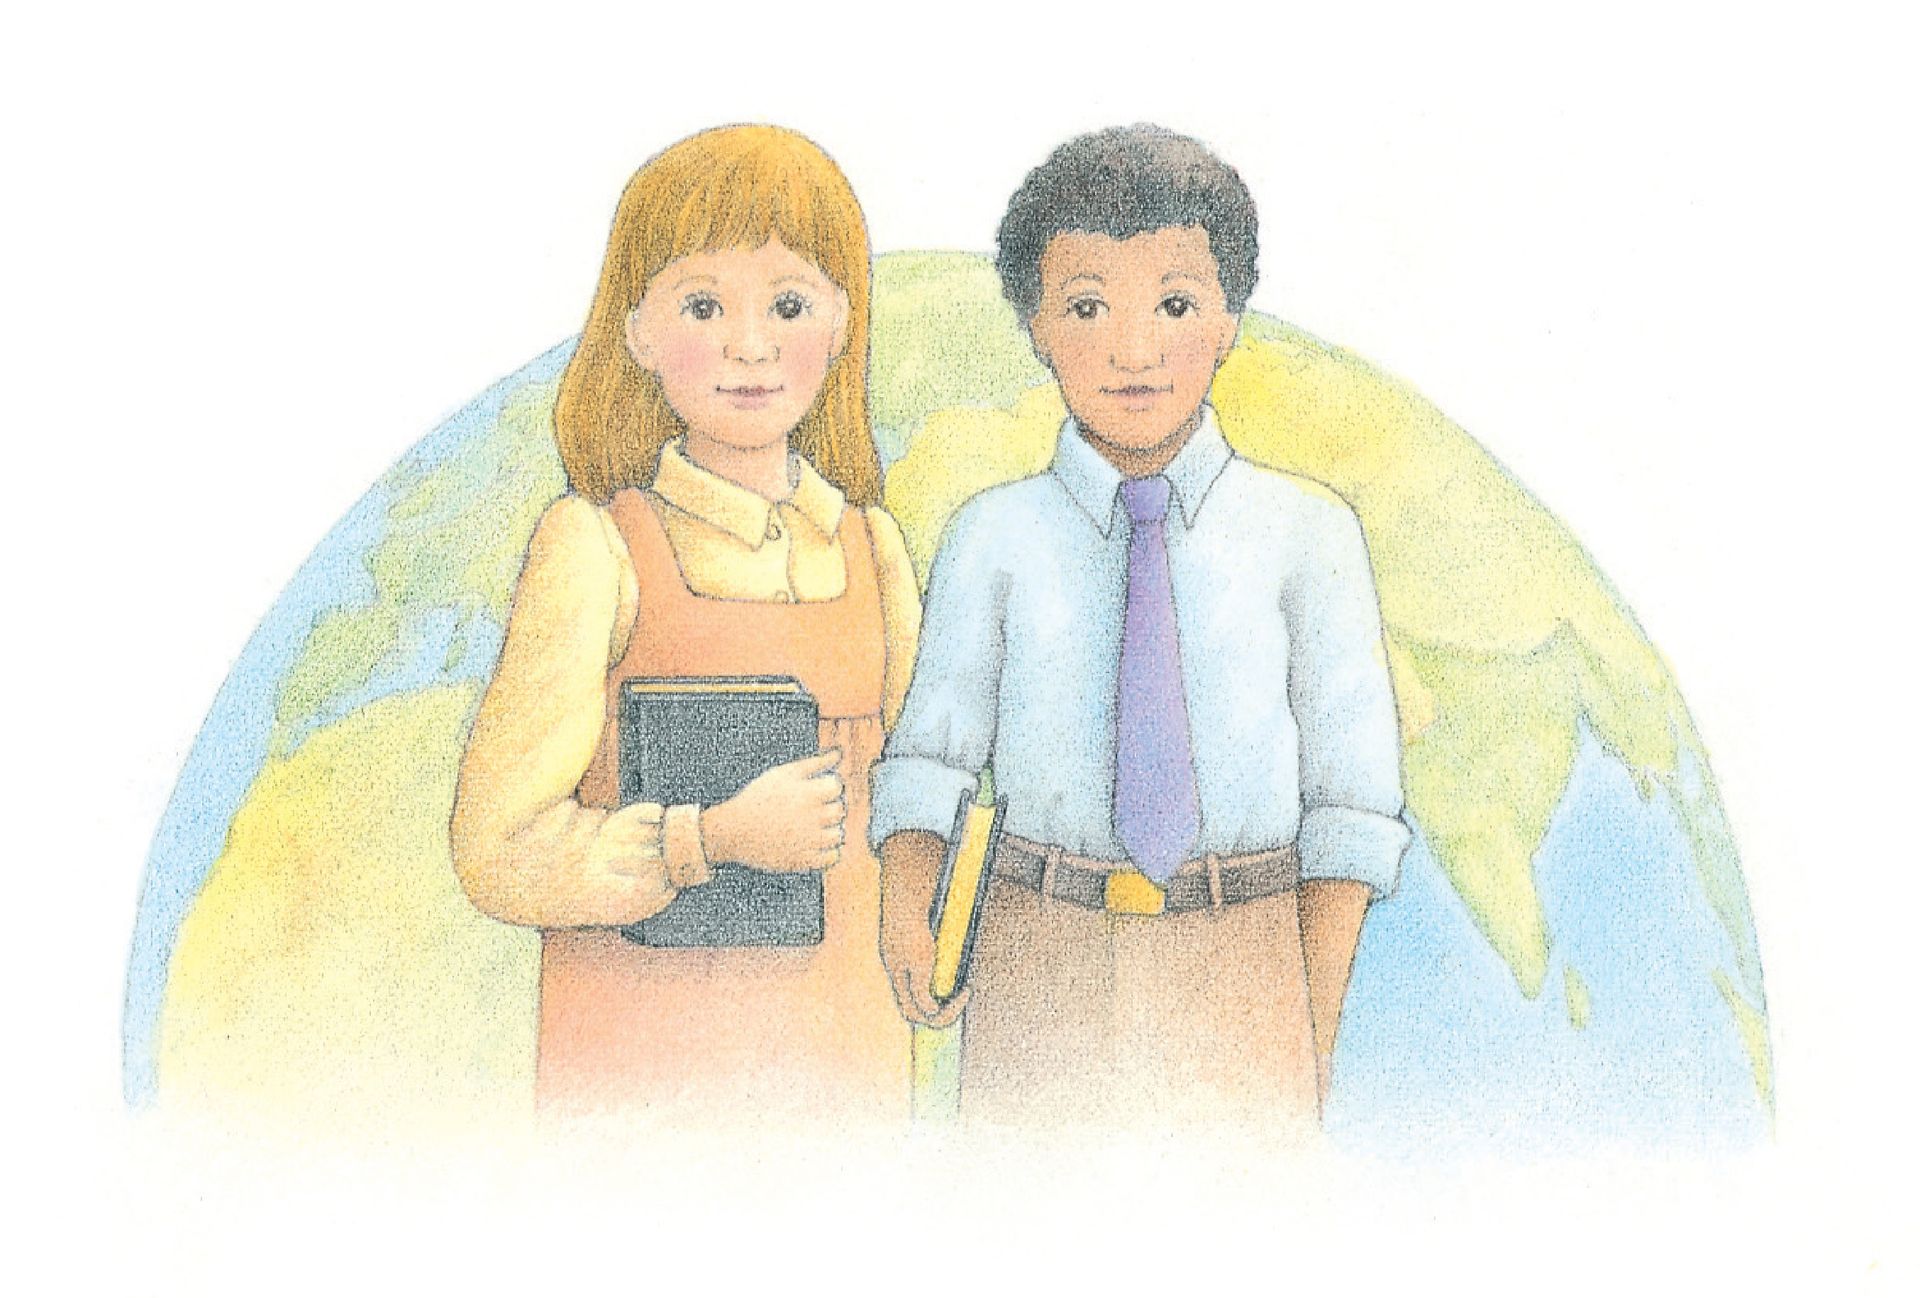 Two children holding scriptures, standing in front of an image of the earth. From the Children’s Songbook, page 172, “We’ll Bring the World His Truth (Army of Helaman)”; watercolor illustration by Beth Whittaker.